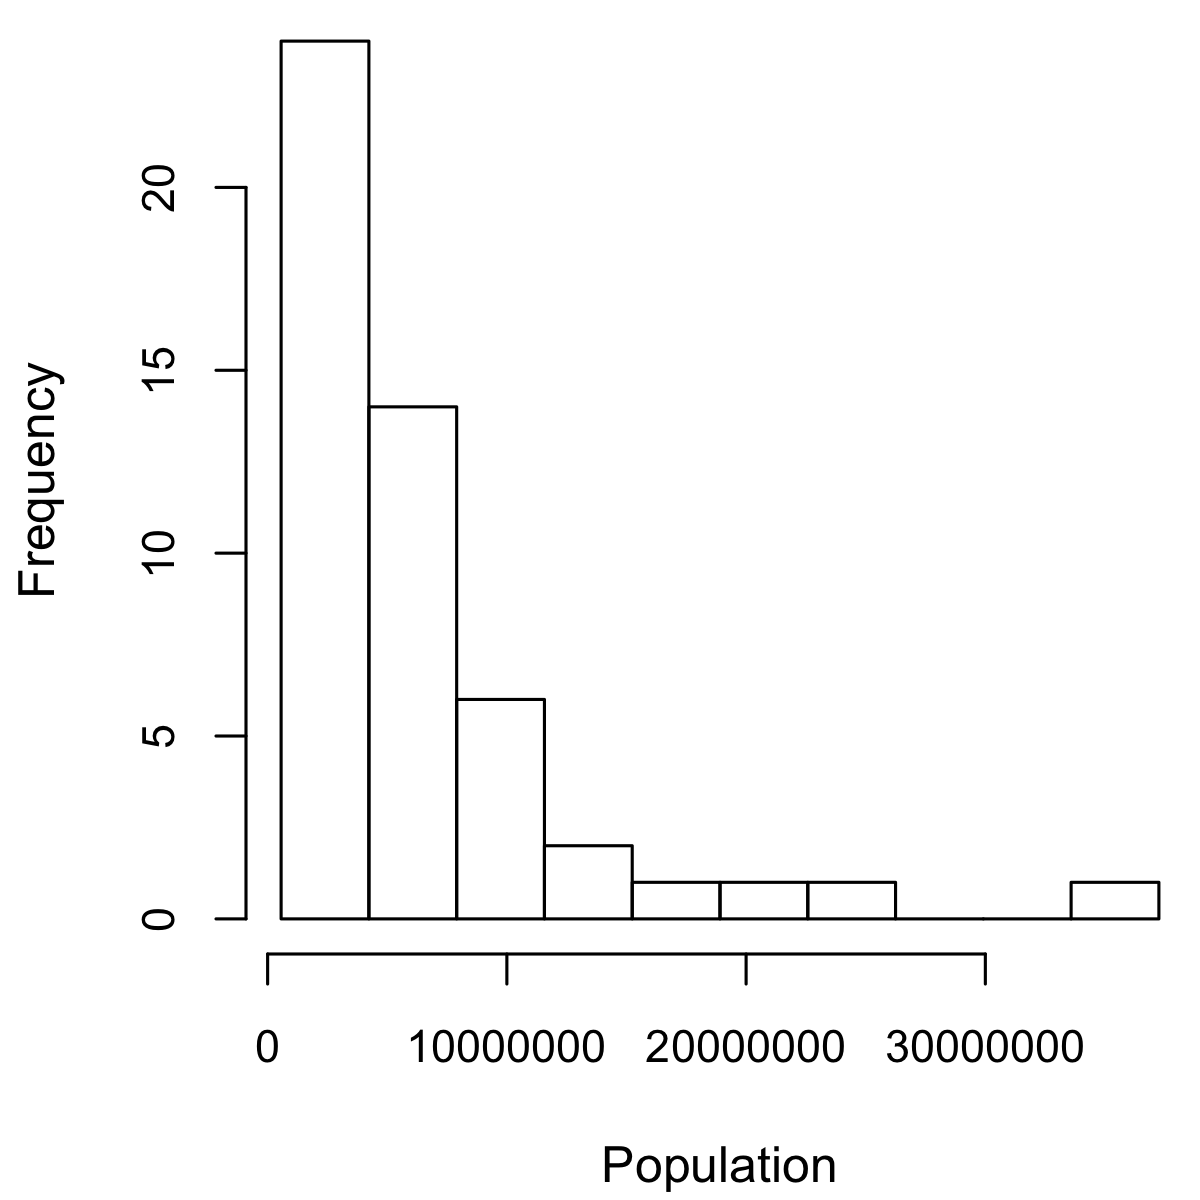 Histogram of state populations